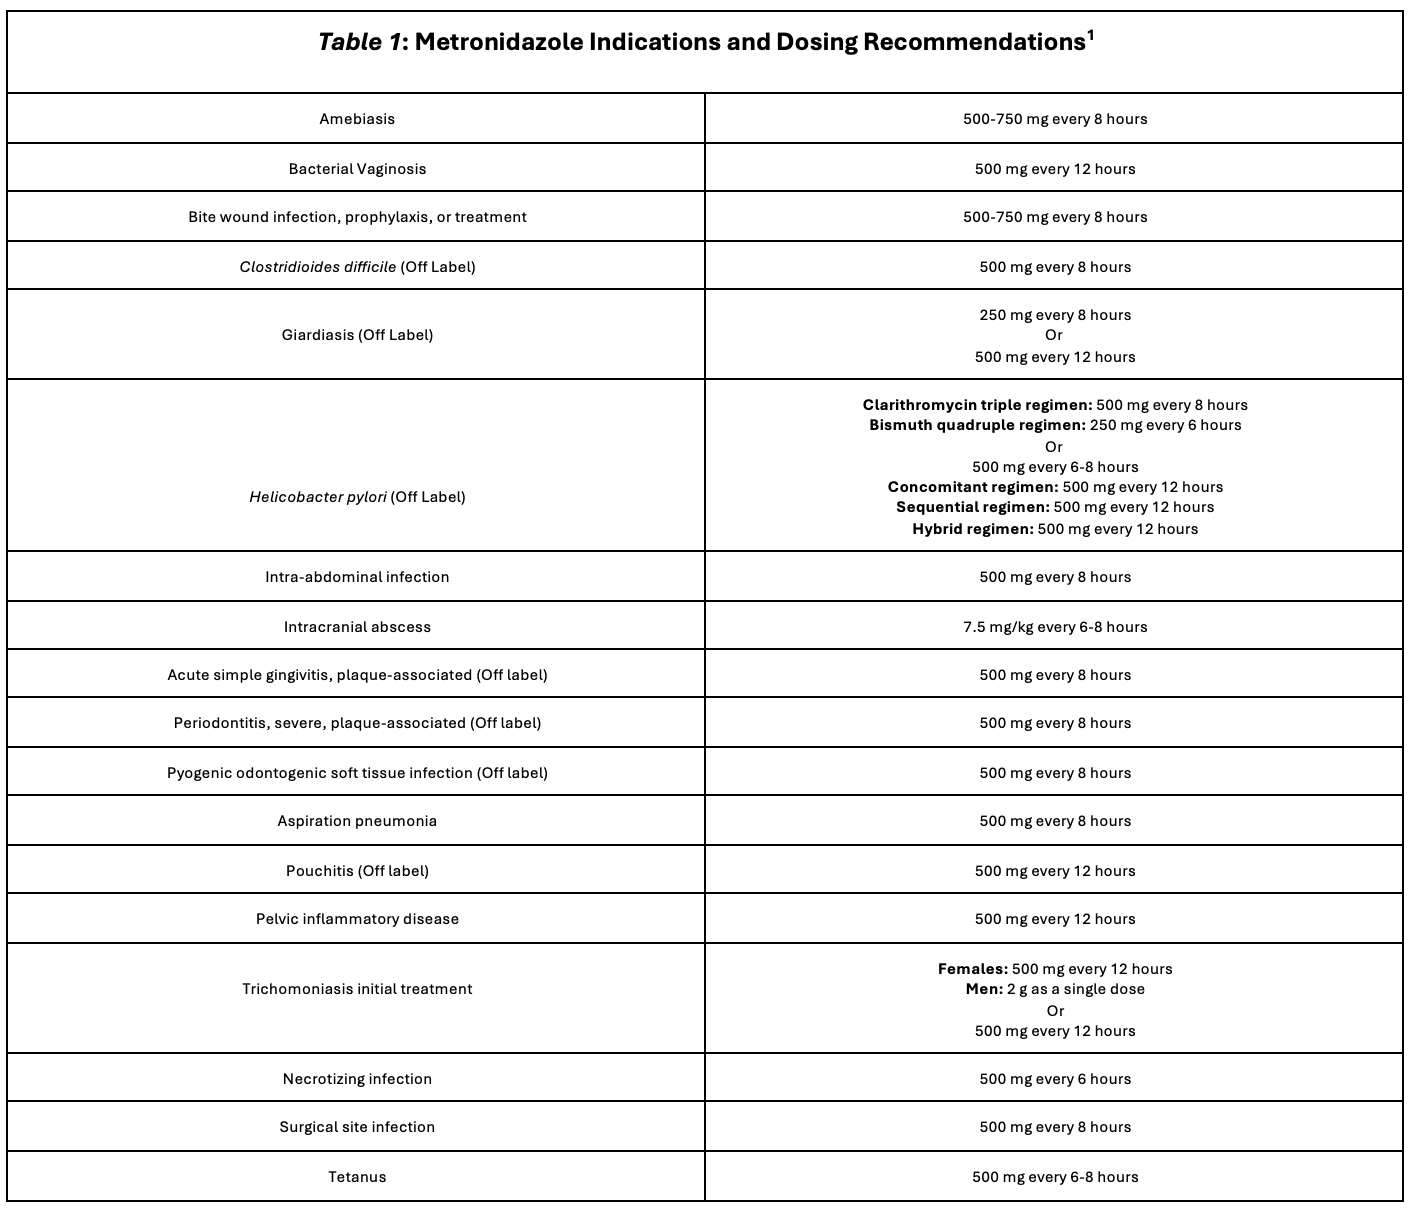 Table 1.1 Metronidazole Indications and Dosing Recommendations